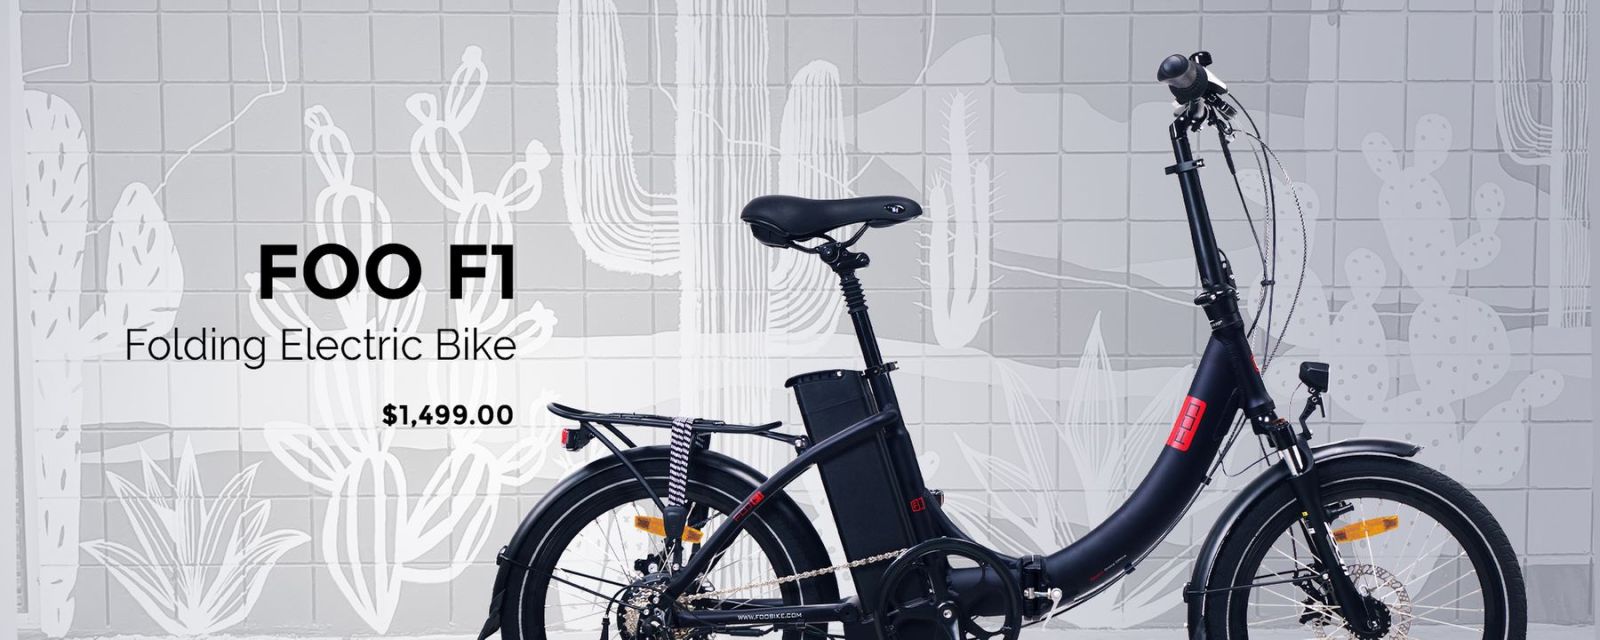 Leon Cycle new E-Bike: The FOO F1 Folding E-Bike. Powered with 36V 14AH battery for your long rides. Easy to fold with a unique, low and stable frame. Frame, stem, pedals and saddle are all foldable for exceptional flexibility.